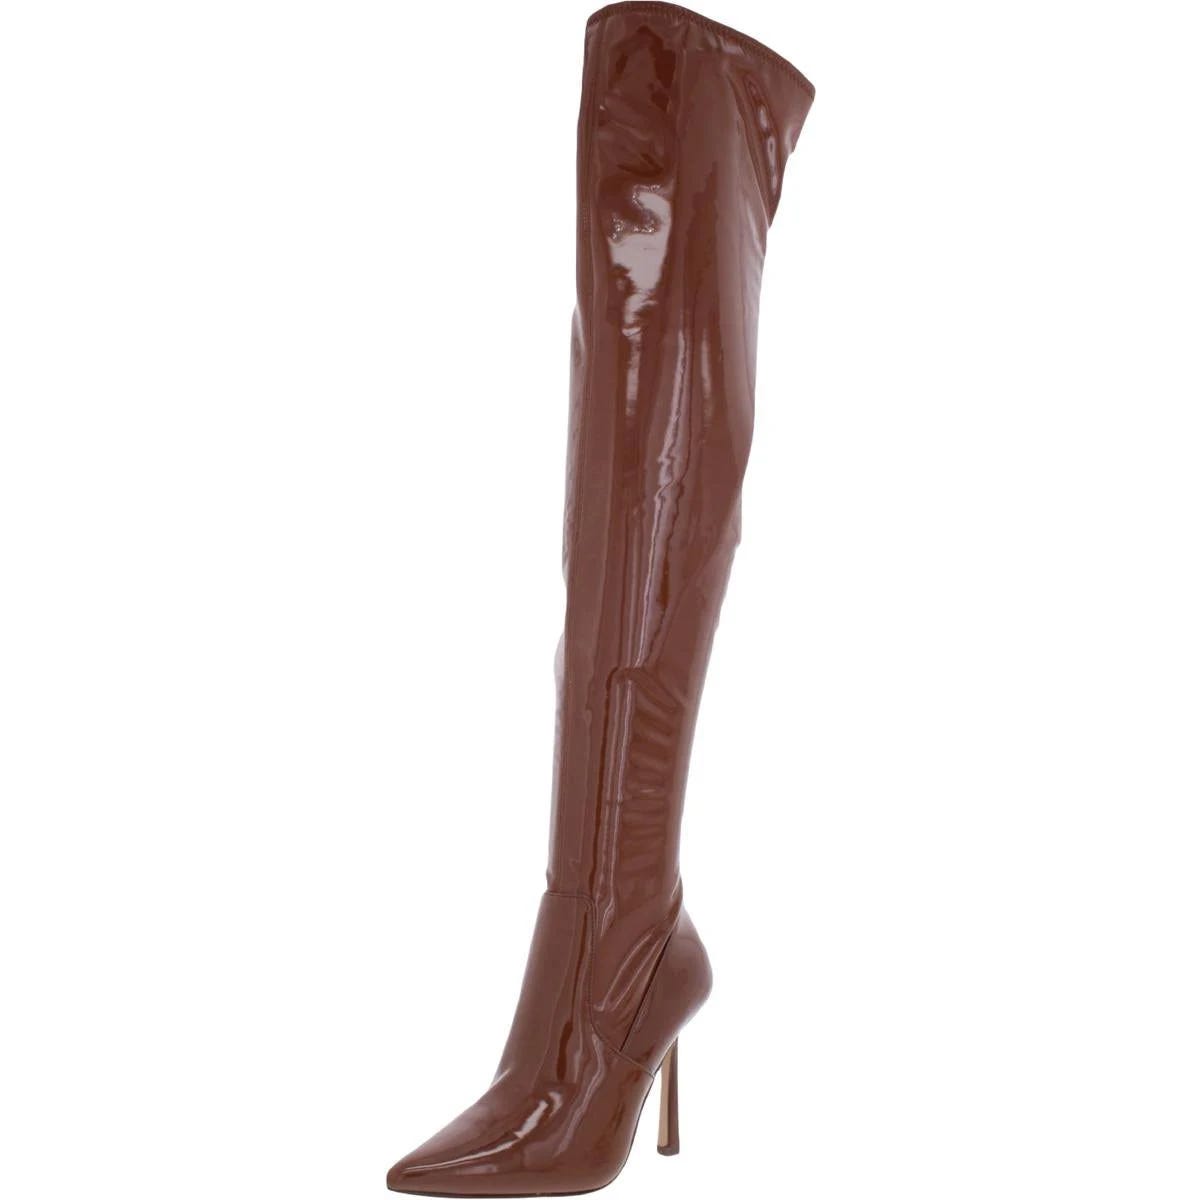 Stylish Brown Thigh-High Boots with Pointed Toe | Image